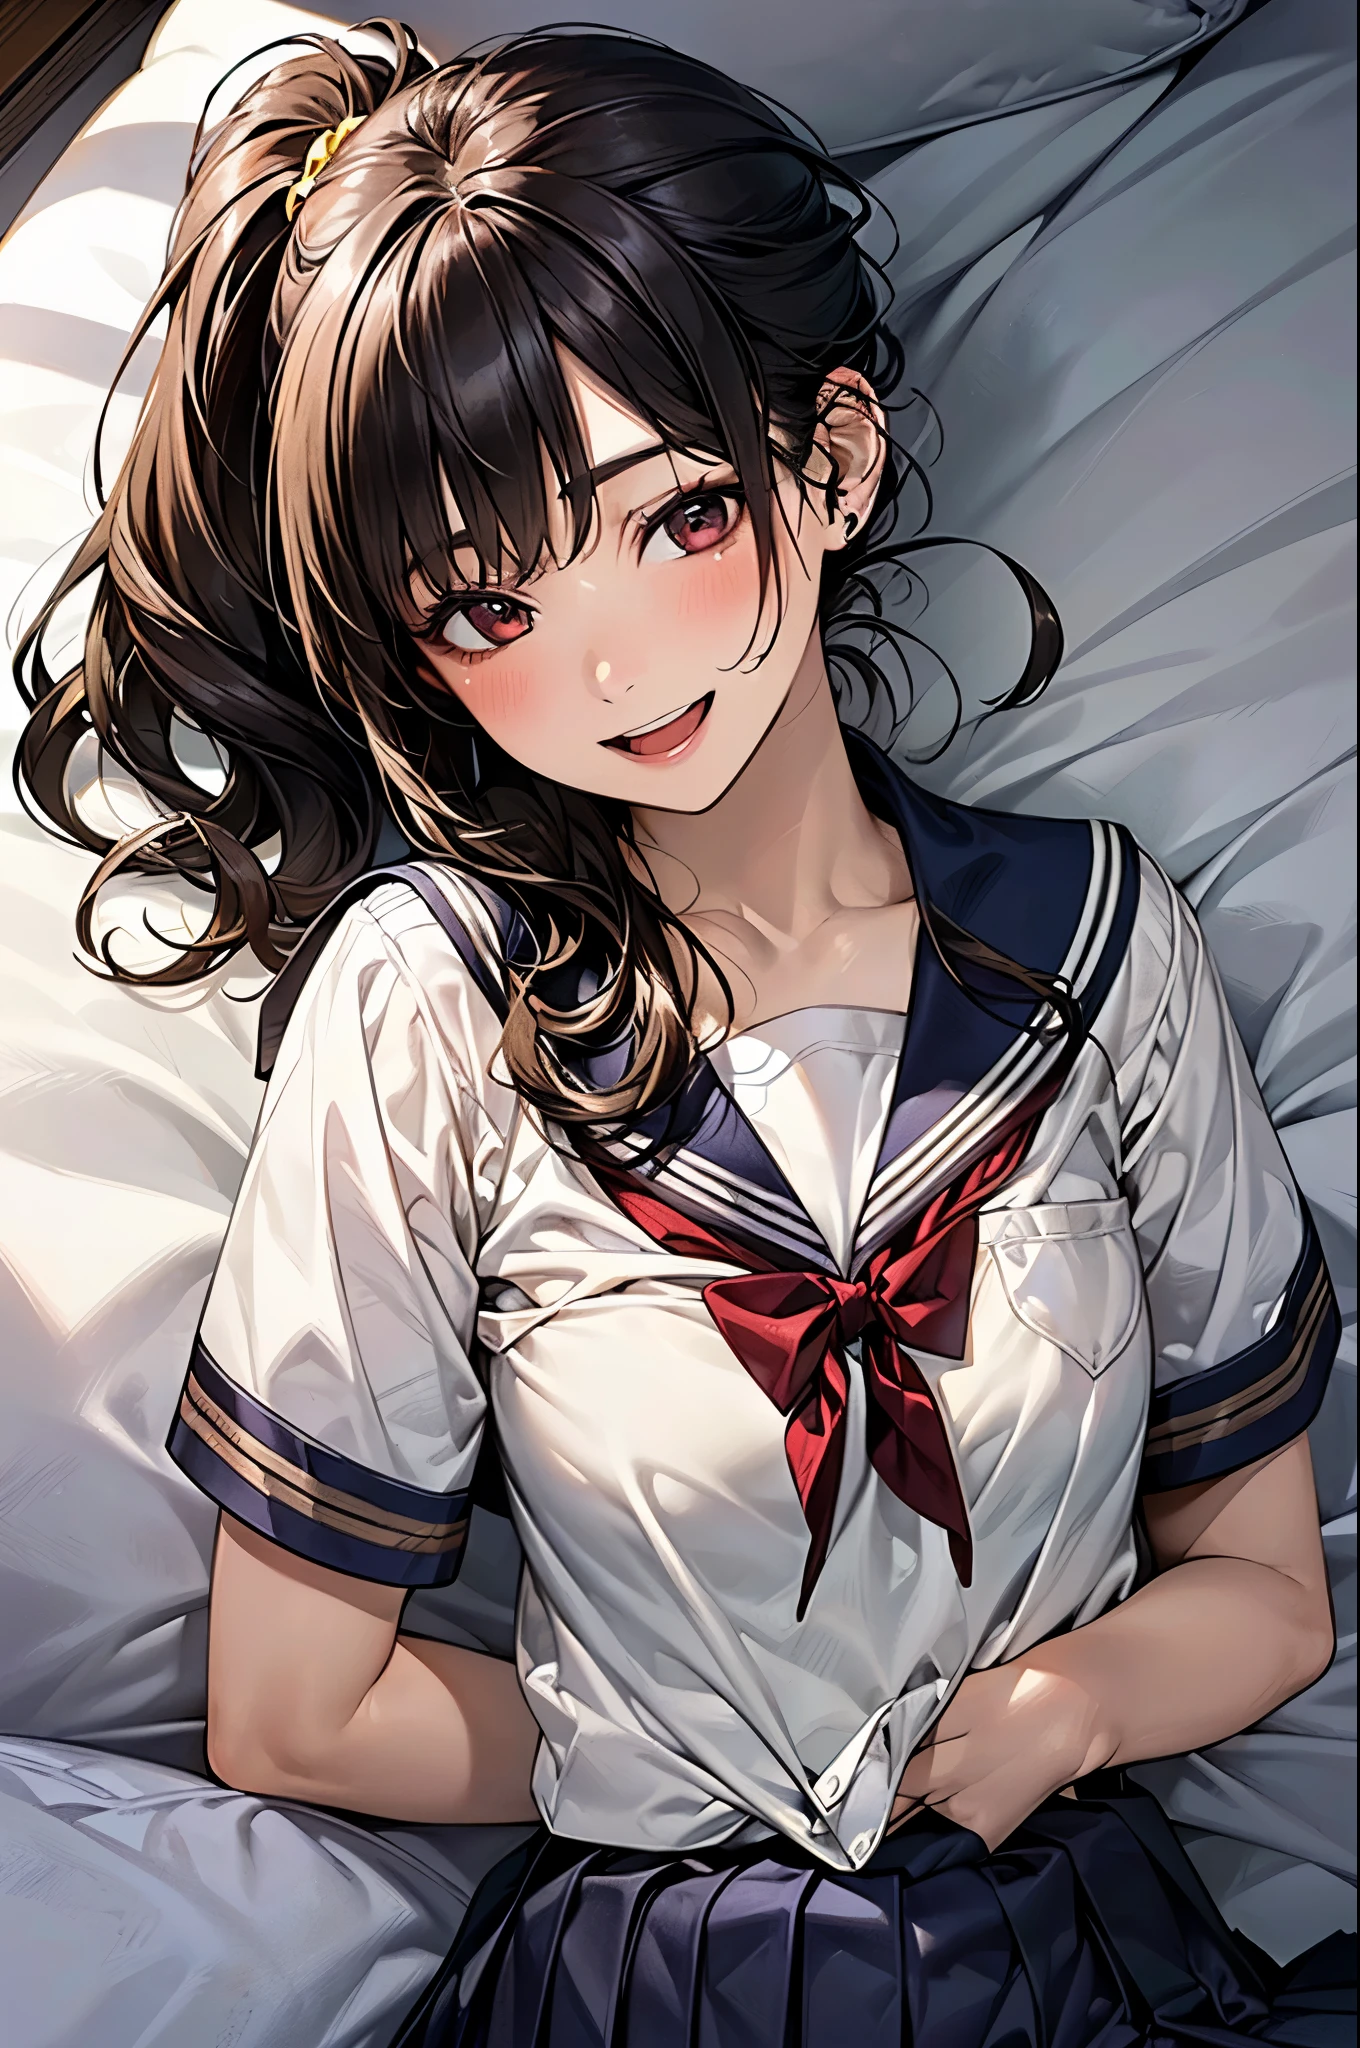 Anime girl laying in bed with her head on her stomach - SeaArt AI